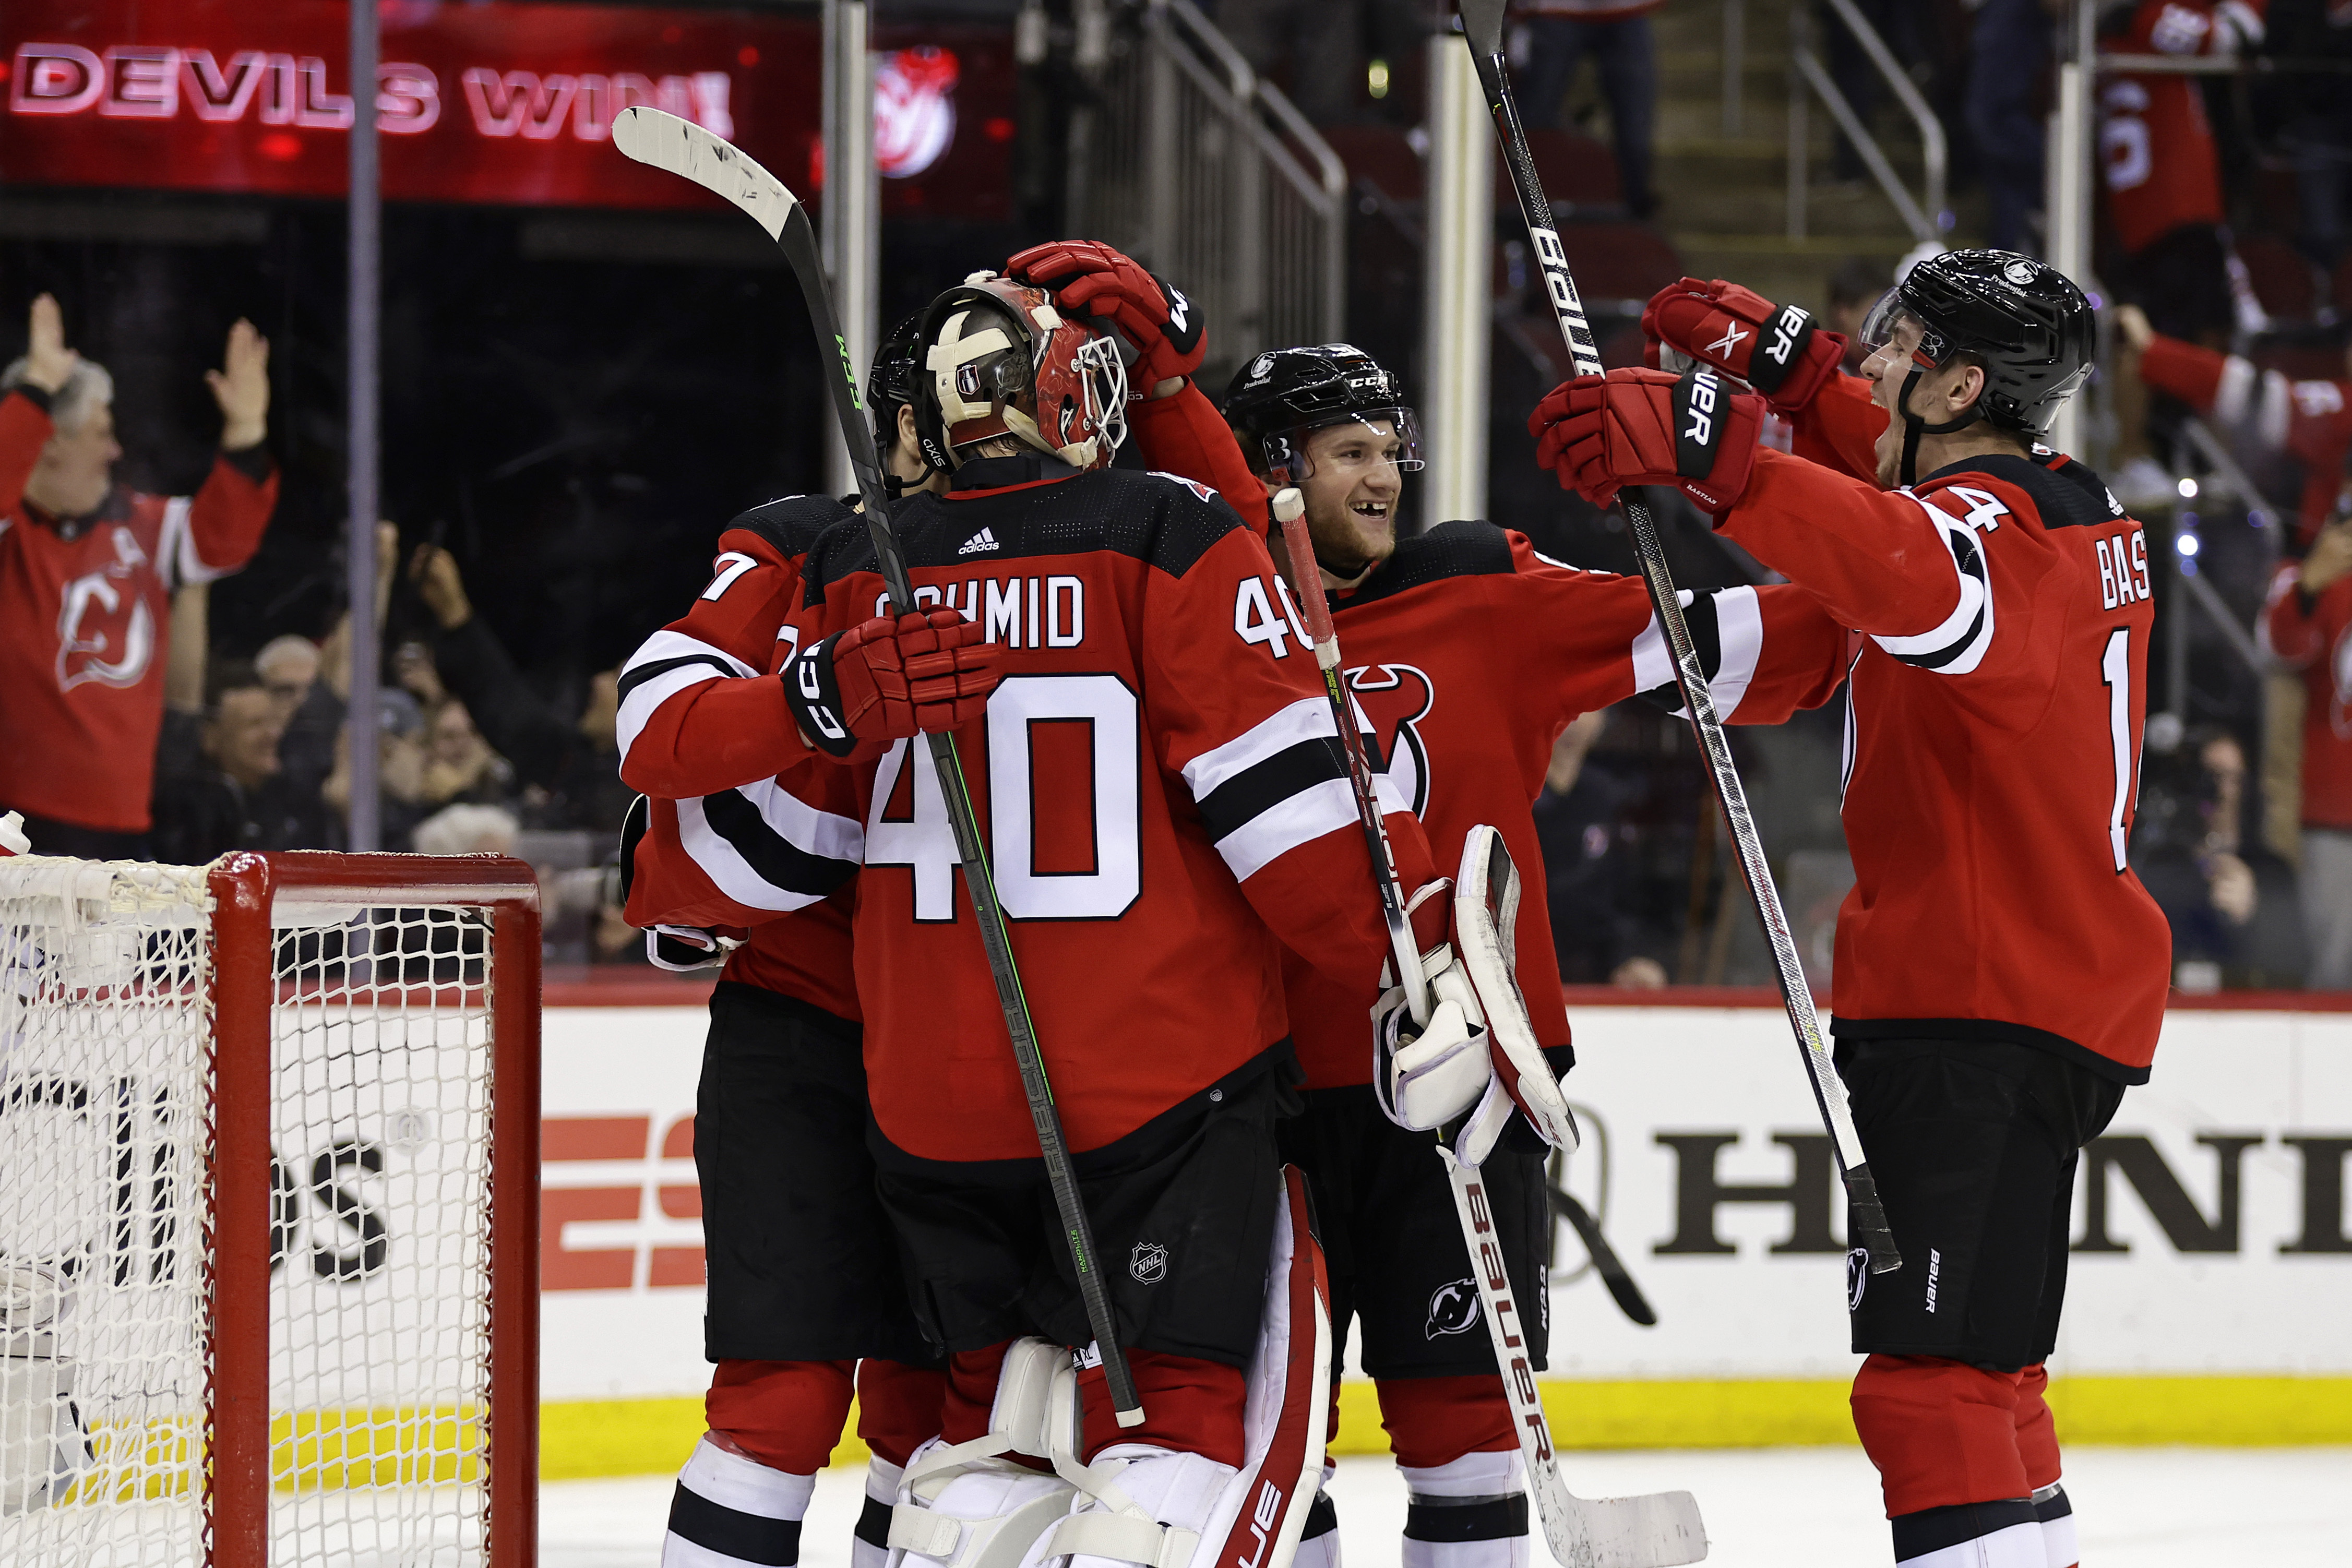 Devils' McLeod and Bastian Prove They Are Built for the Playoffs